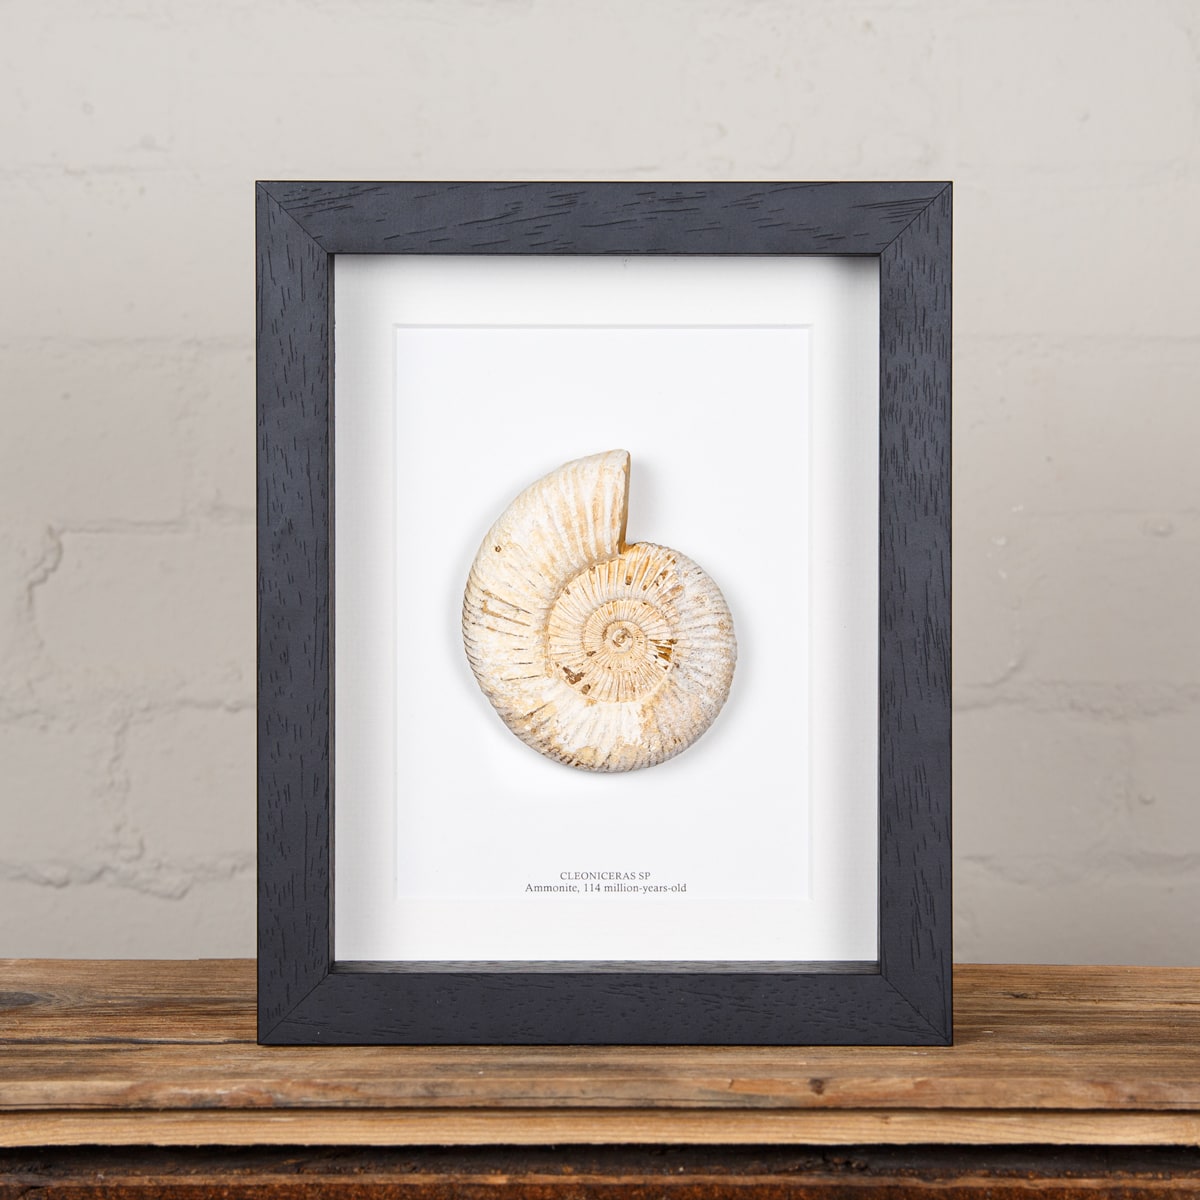 Minibeast Large White Spine Whole Ammonite Fossil in Box Frame (Cleoniceras sp)